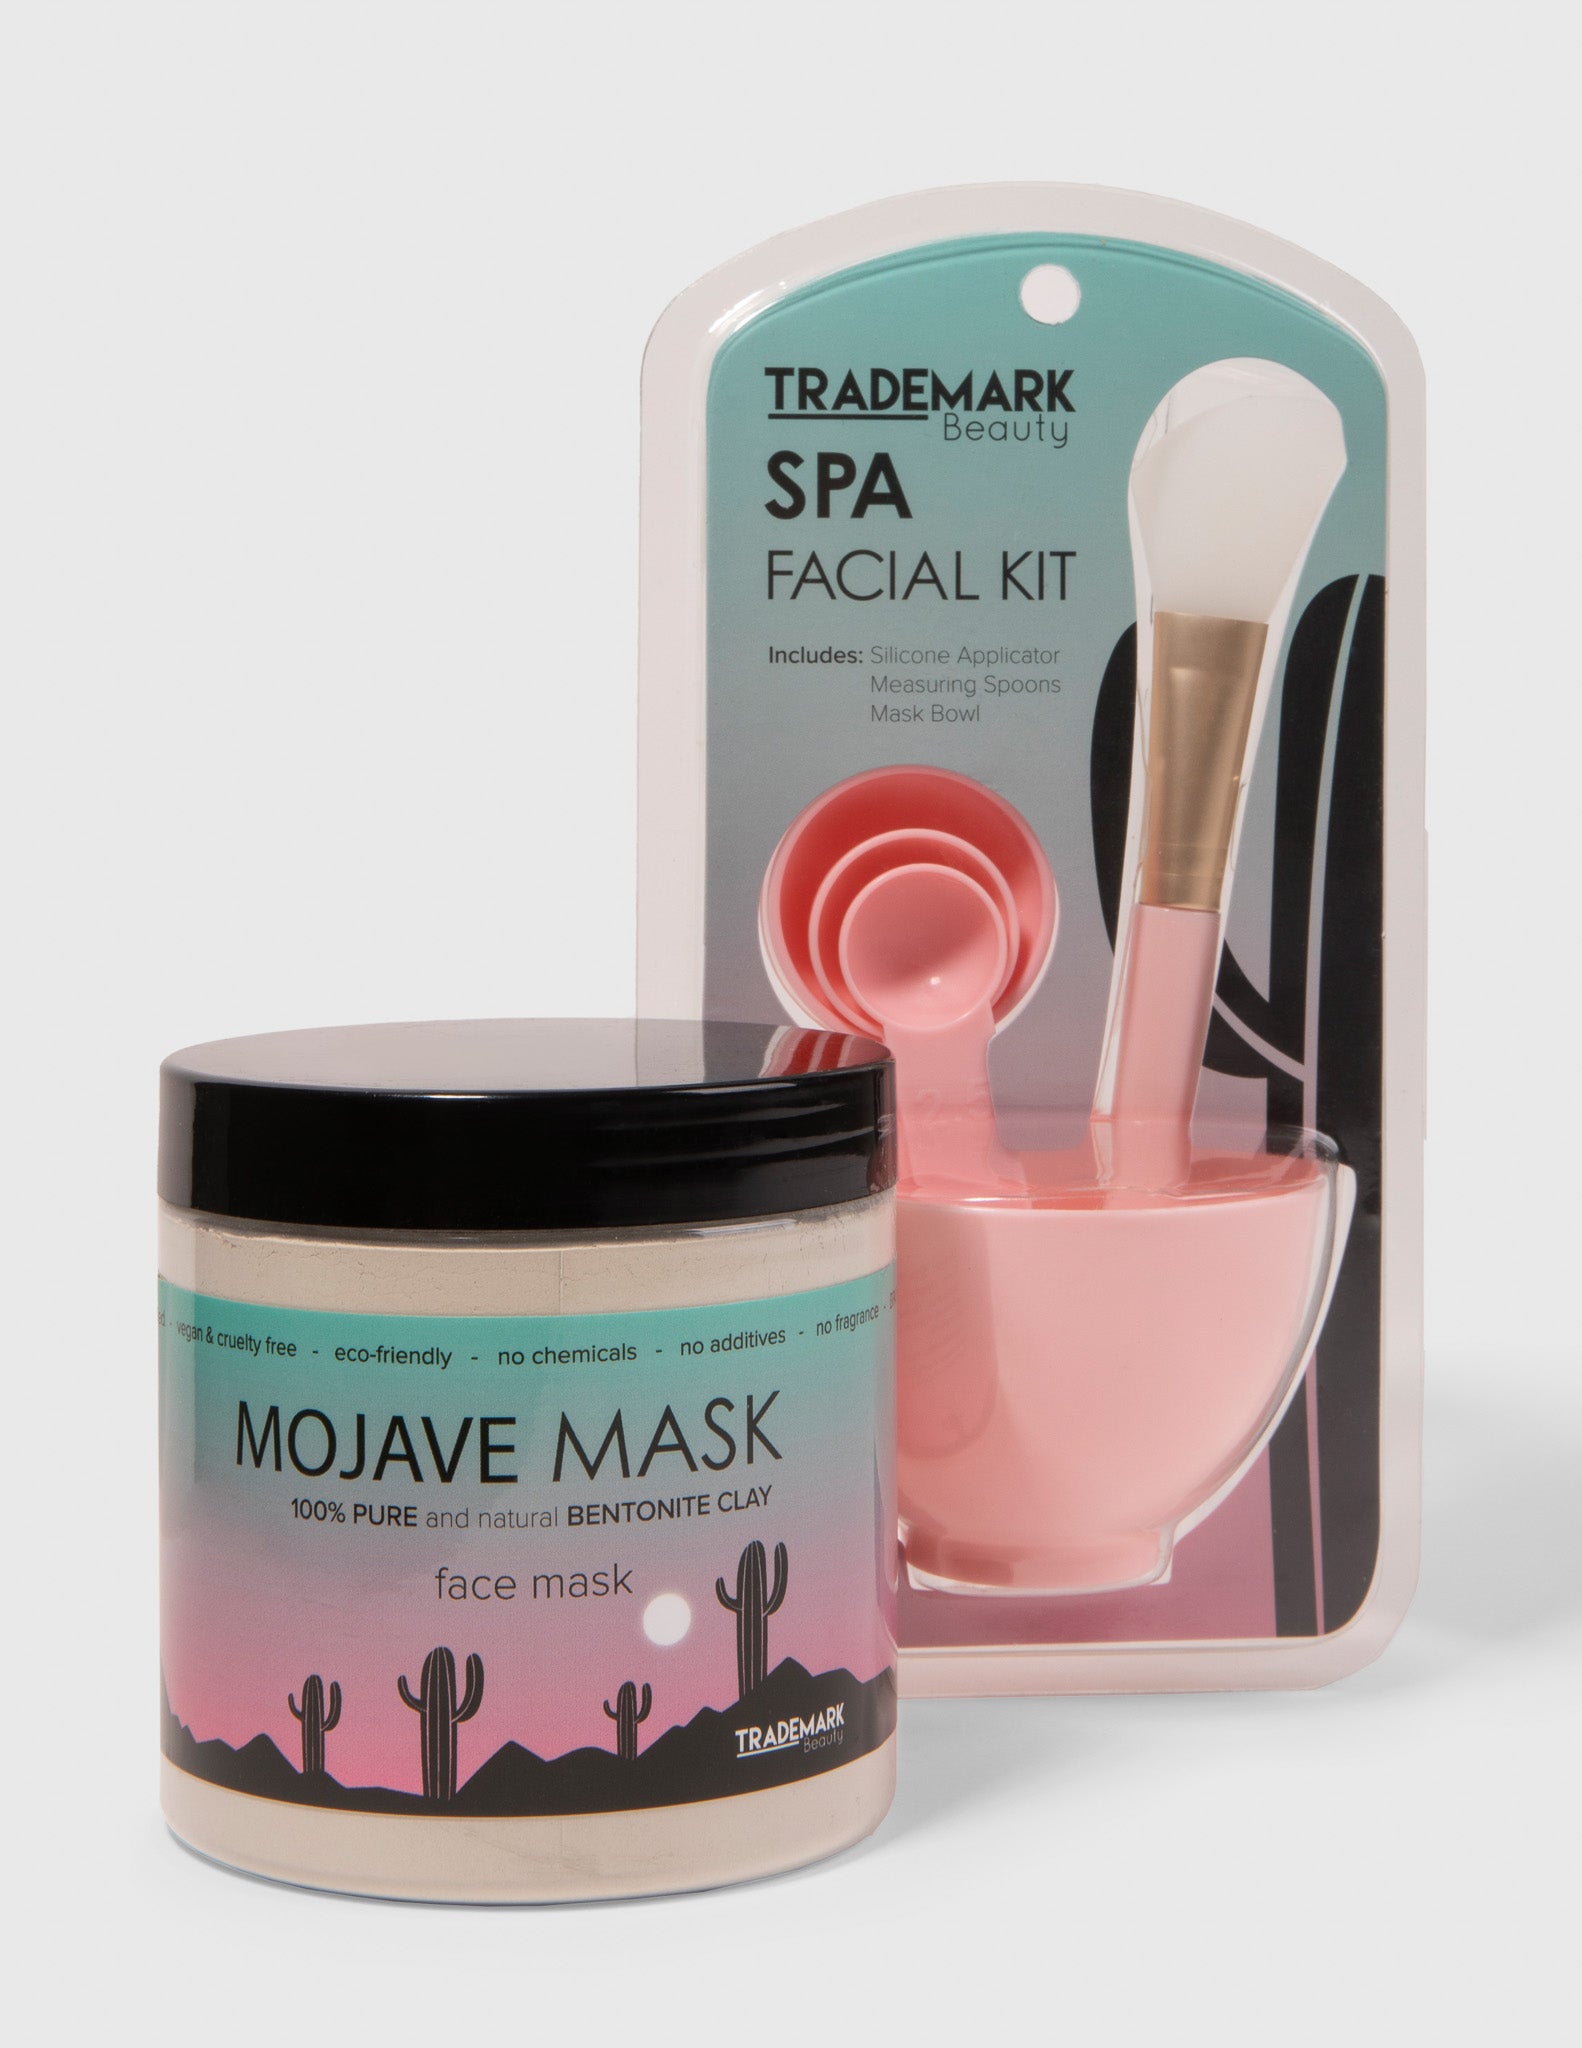 Mojave Face Mask with Facial Set - Trademark Beauty